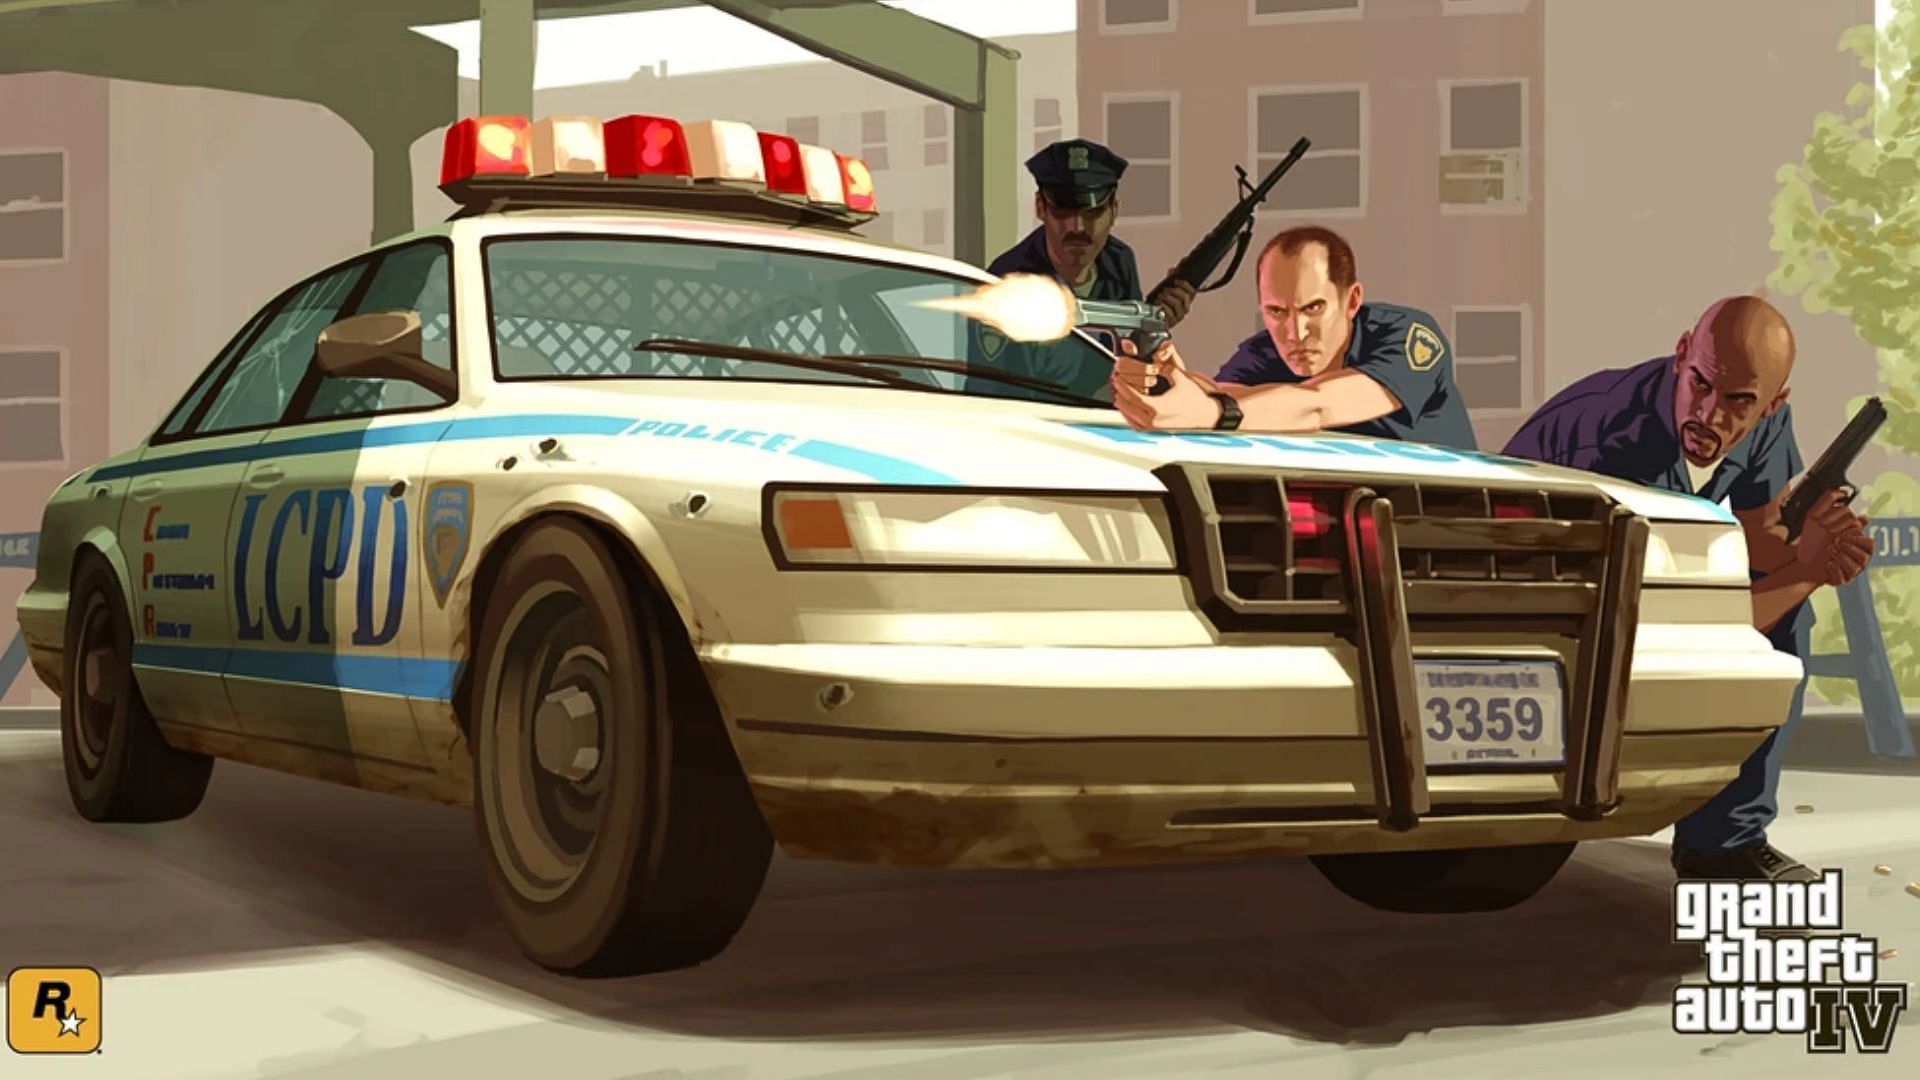 A promotional artwork for the Liberty City Police Department in Grand Theft Auto 4 (Image via Rockstar Games)